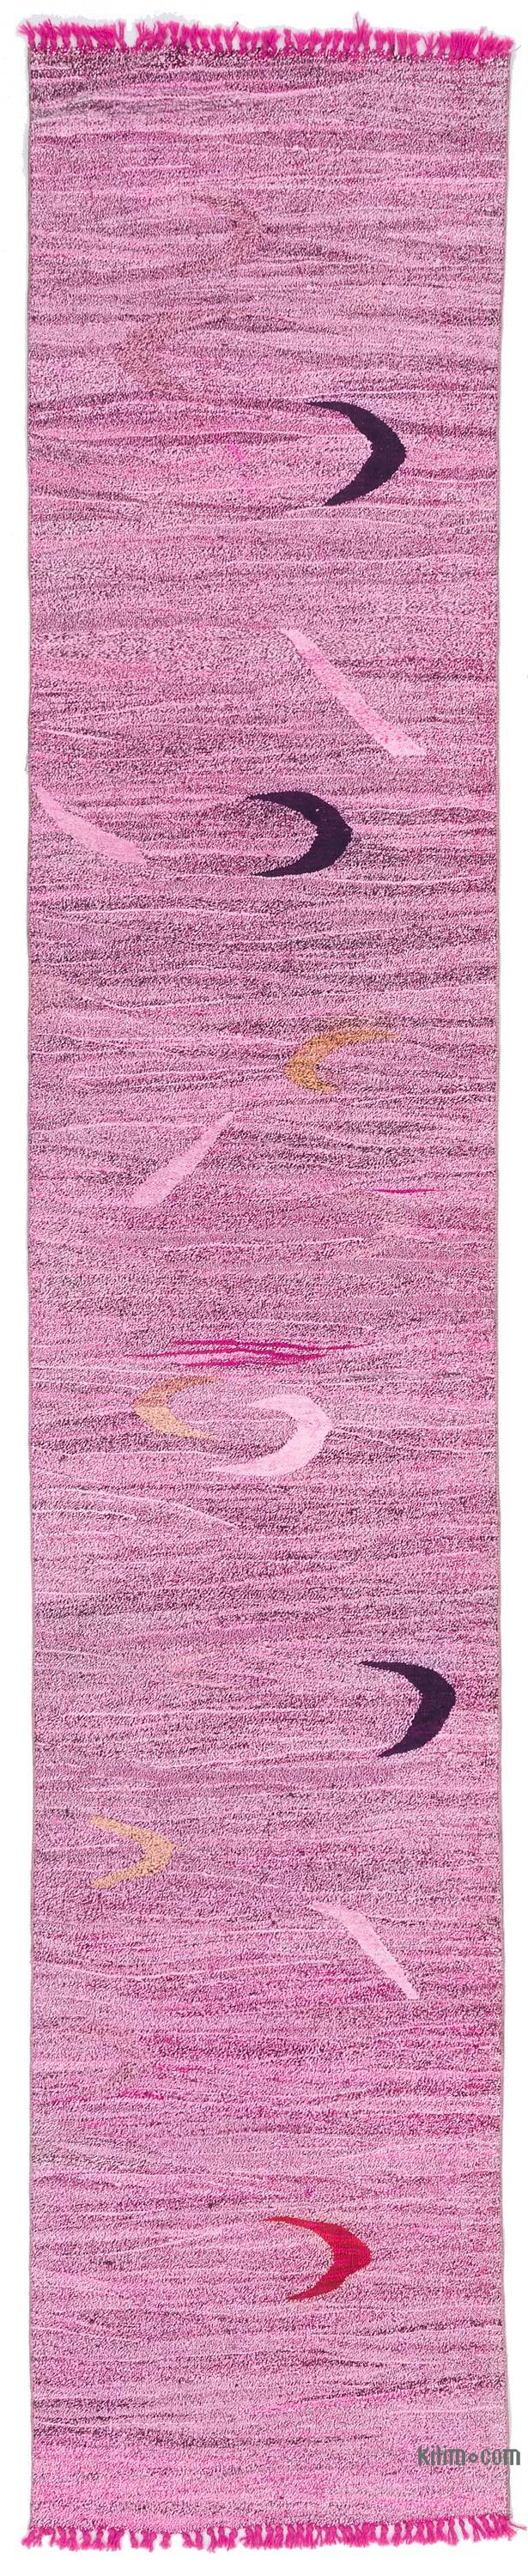 Pink New Contemporary Handwoven Kilim Runner - 2' 9" x 14' 3" (33 in. x 171 in.) - K0061054